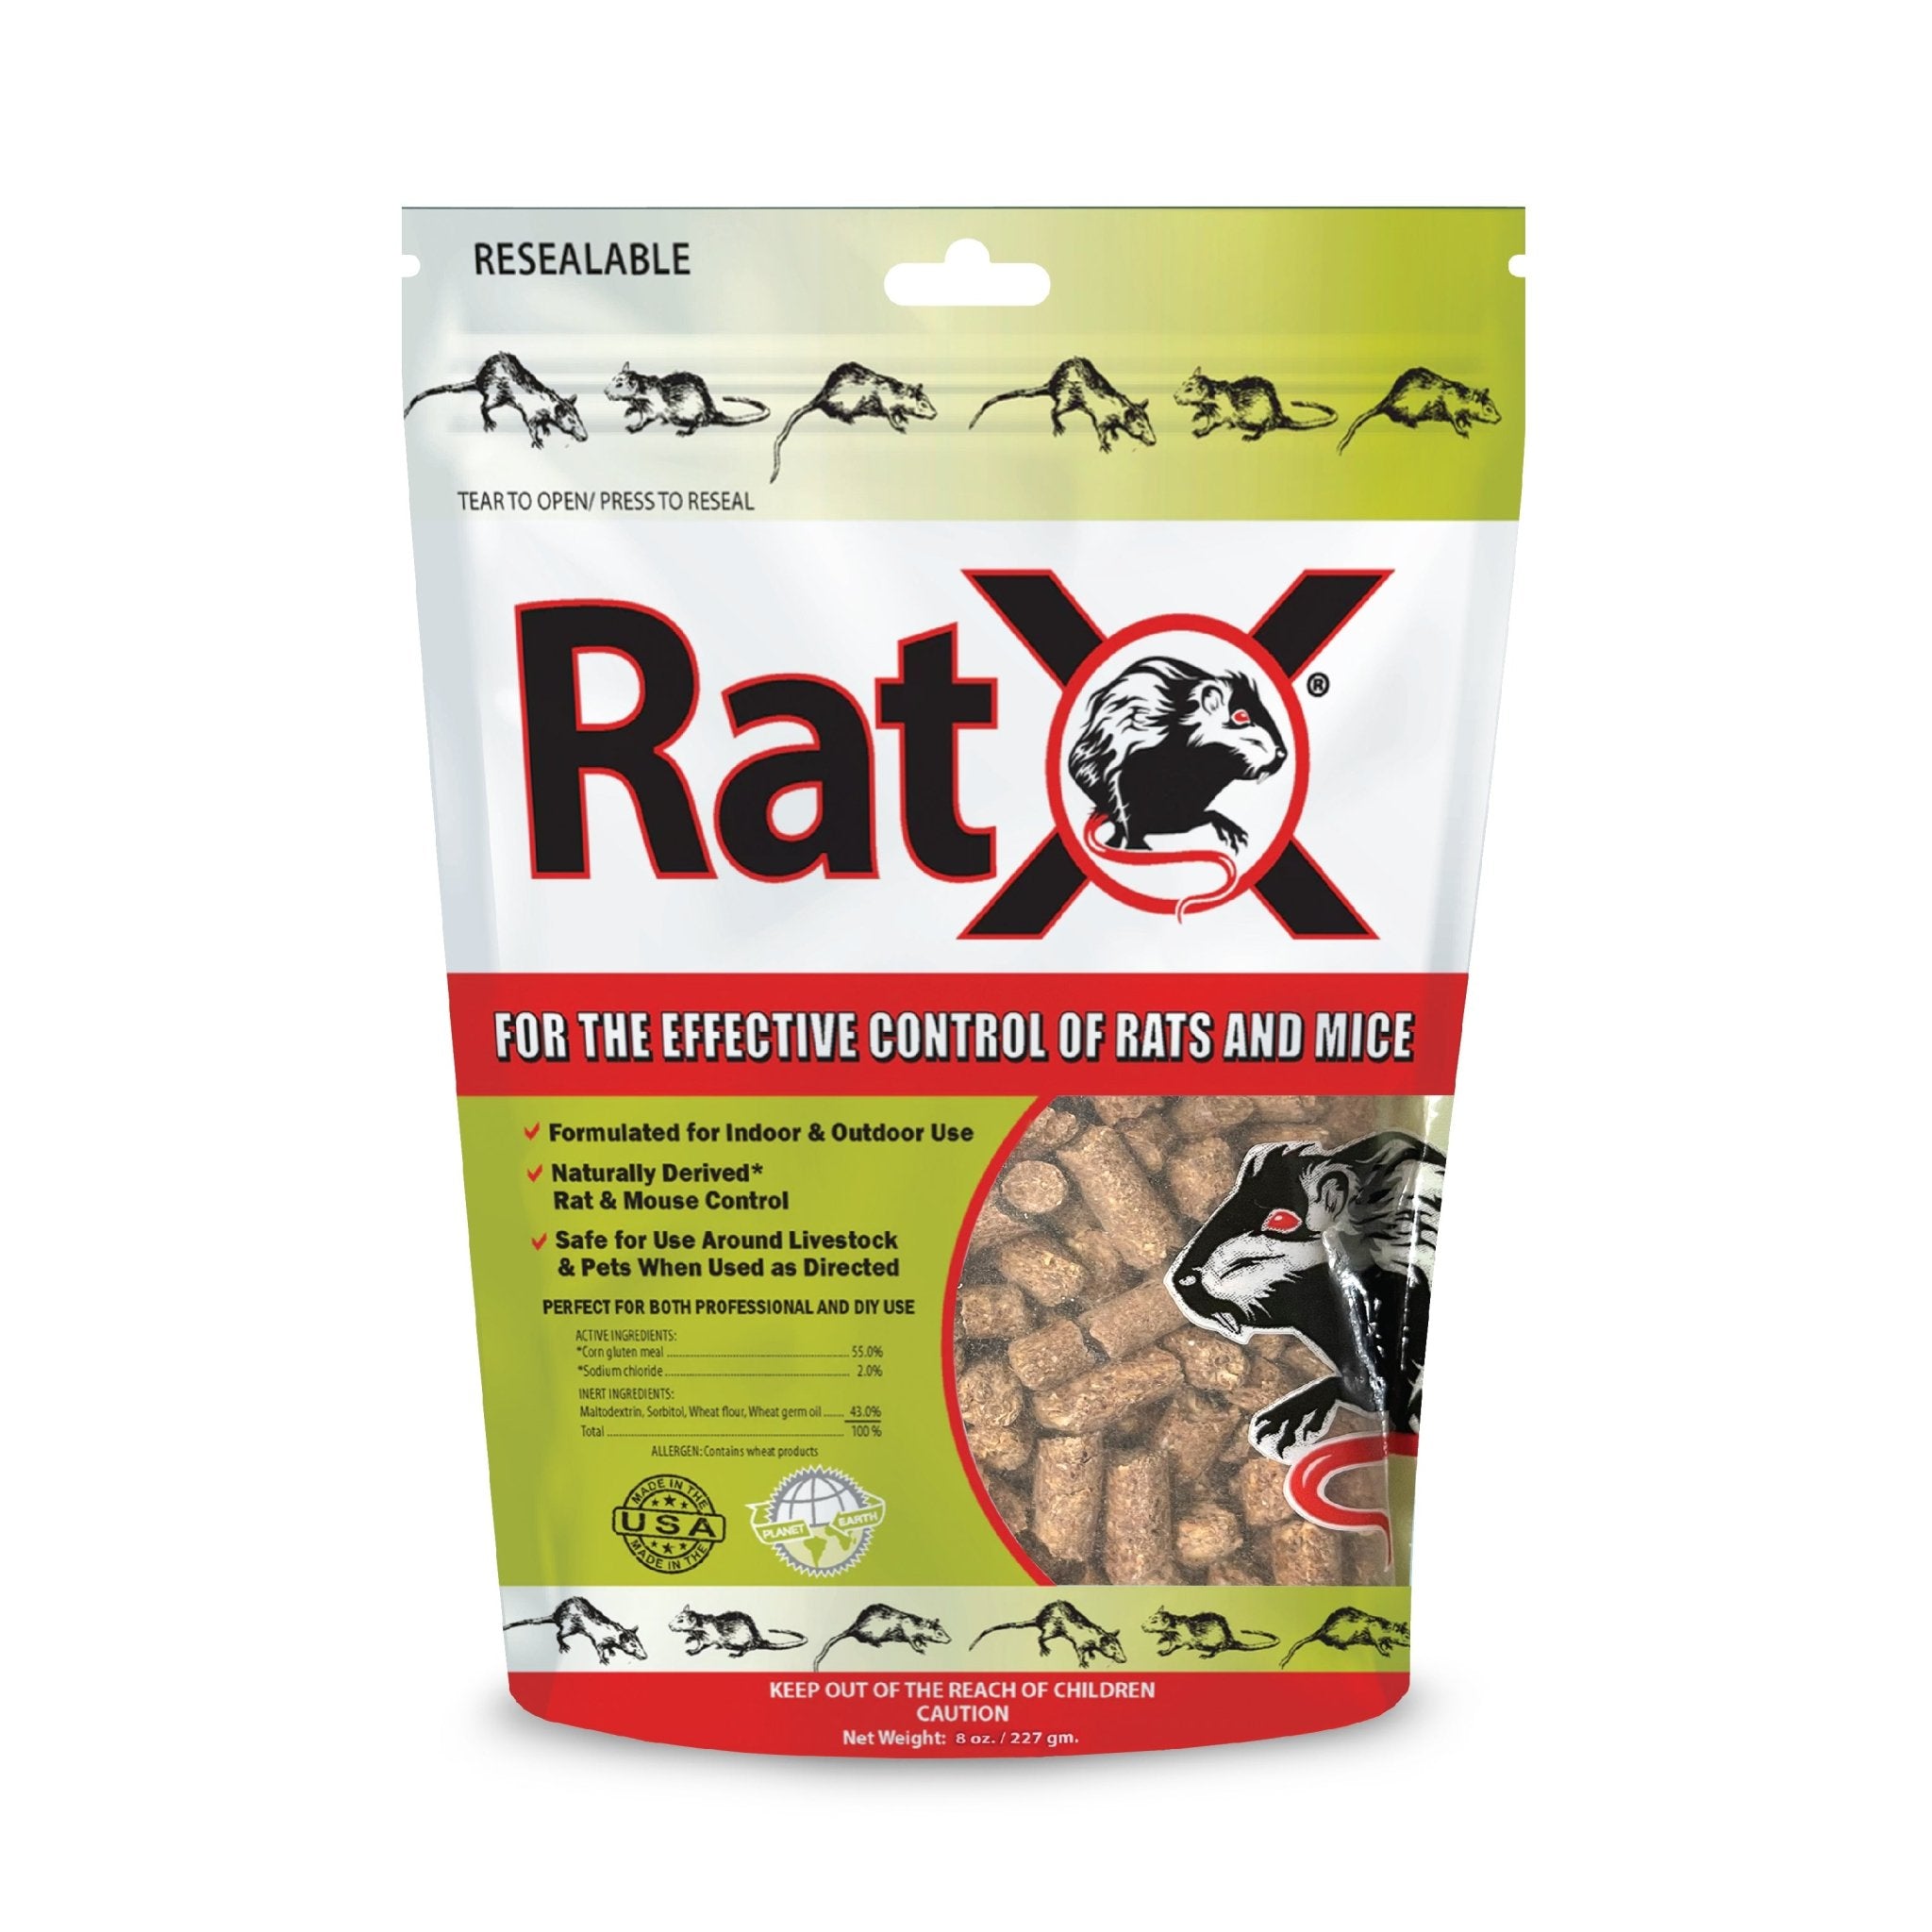 EcoClear RatX® Rat and Mouse Attractant - Oley, PA - Oley Valley Feed